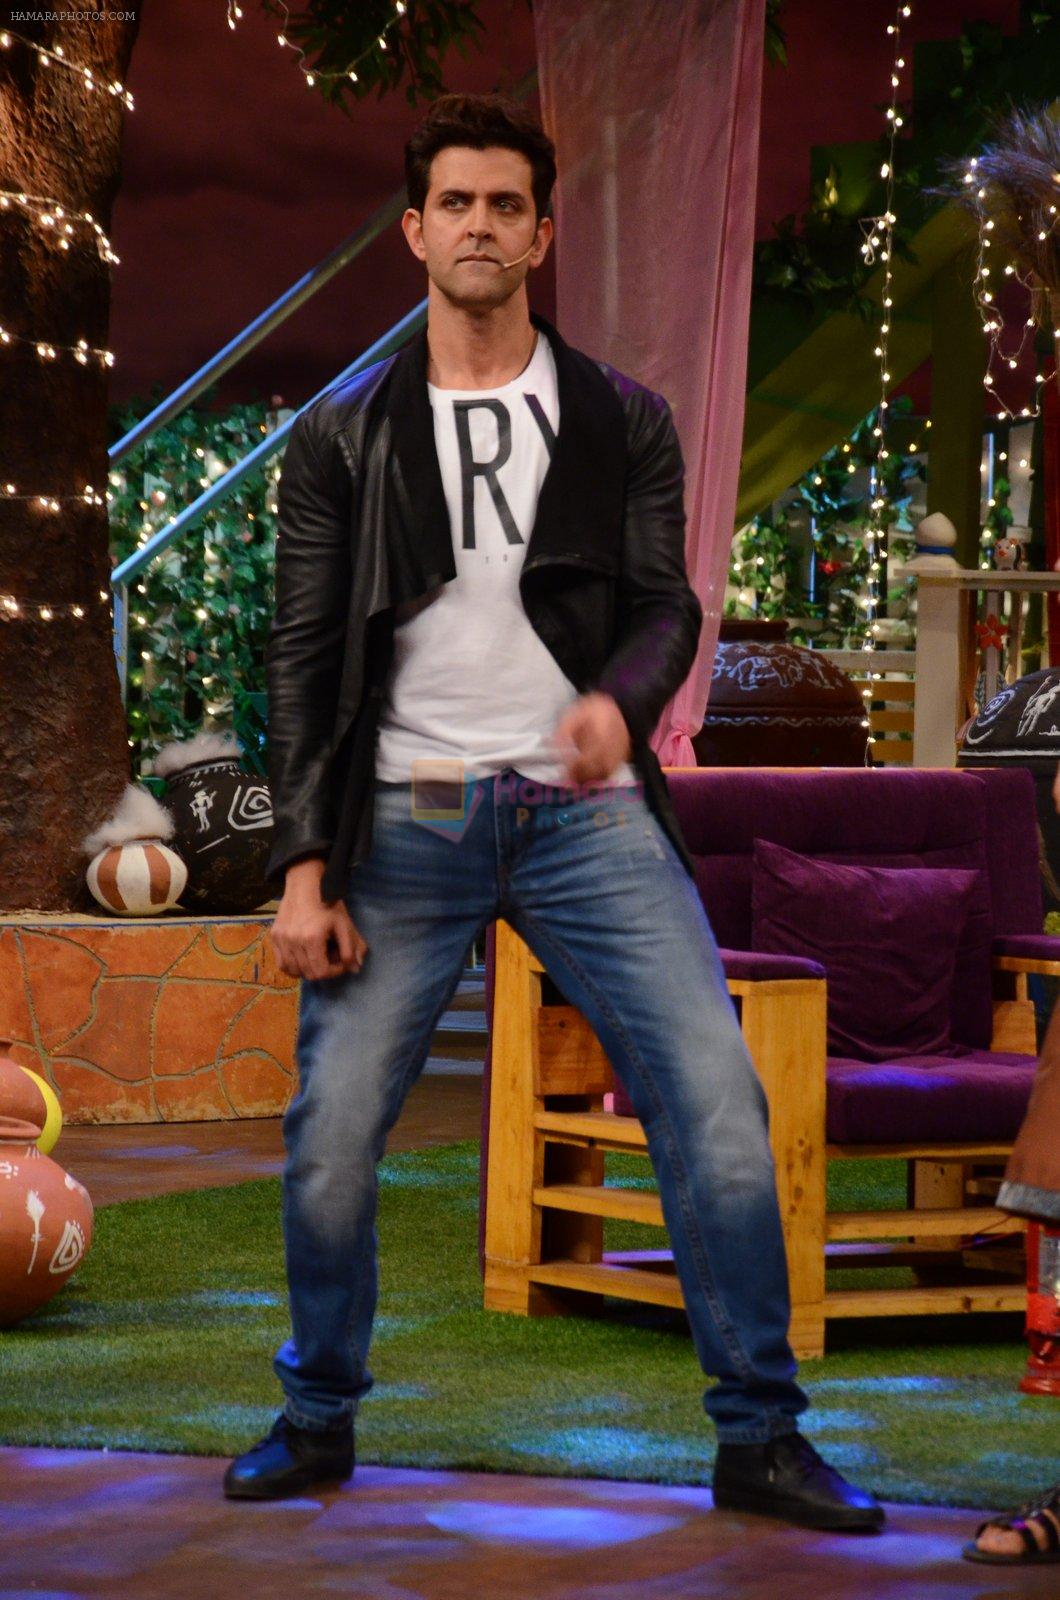 Hrithik Roshan promote Mohenjo Daro on the sets of The Kapil Sharma Show on 2nd Aug 2016